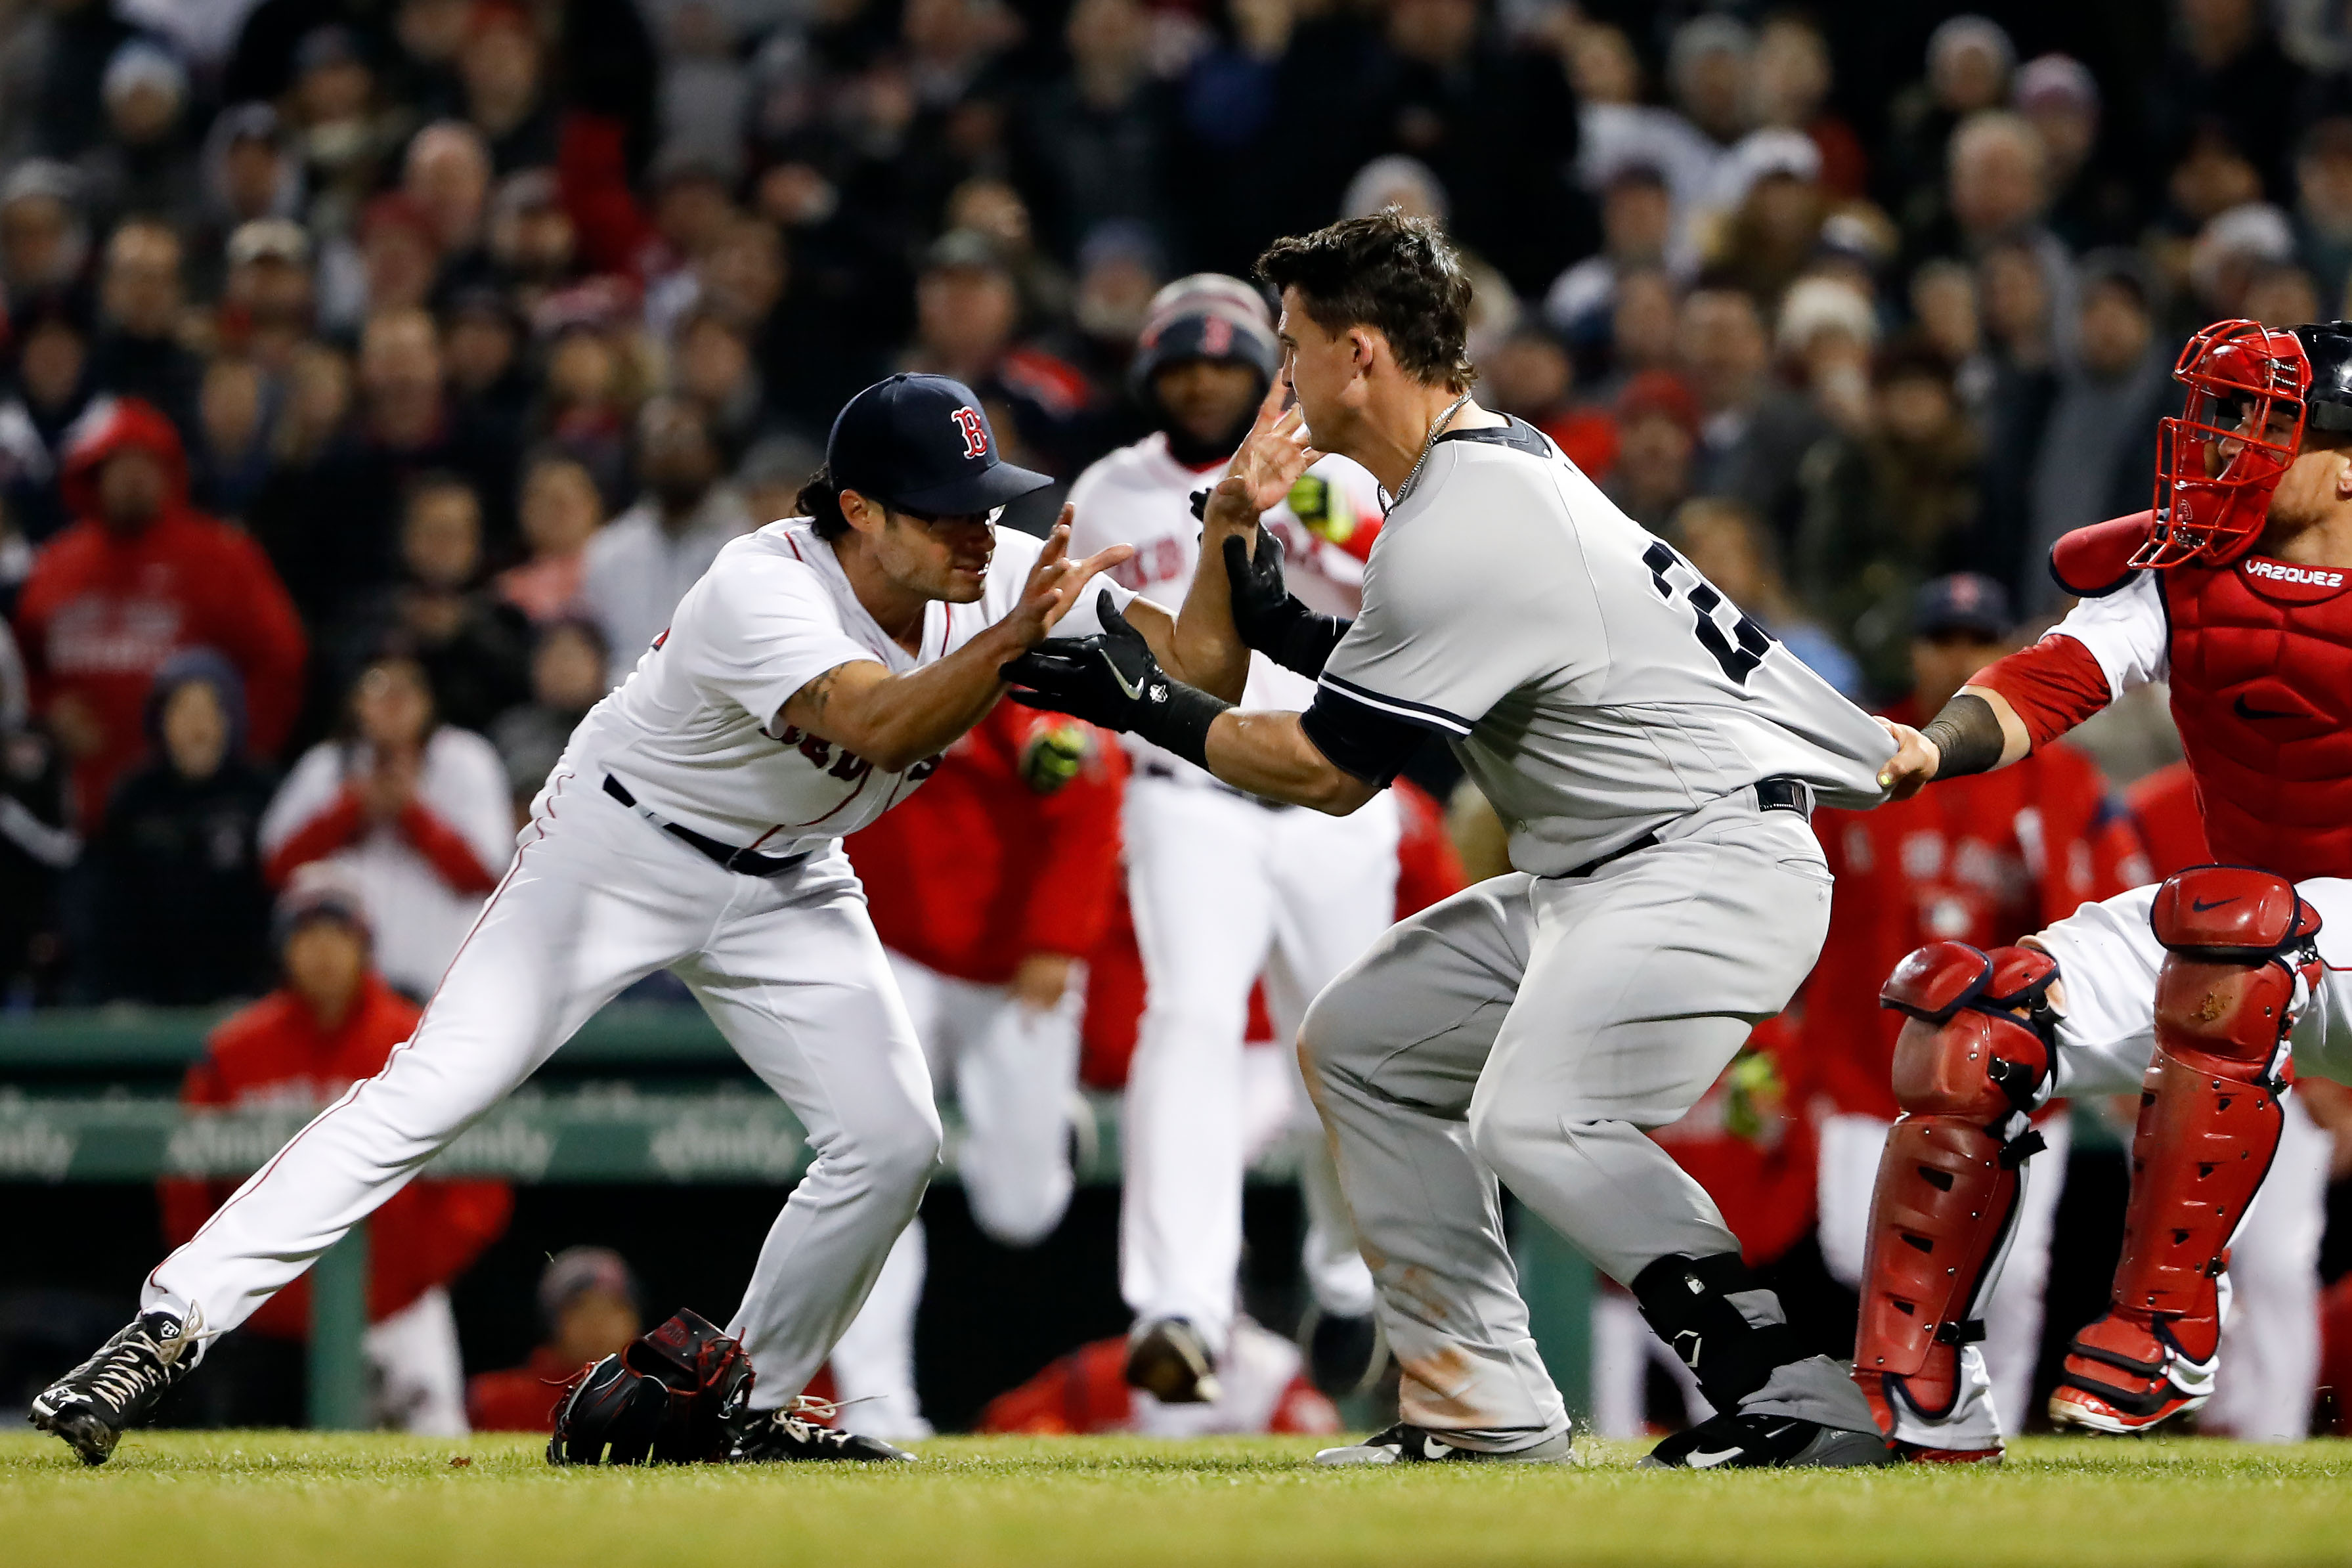 Should Red Sox Expect Retribution From Yankees Over Unwritten Rules?